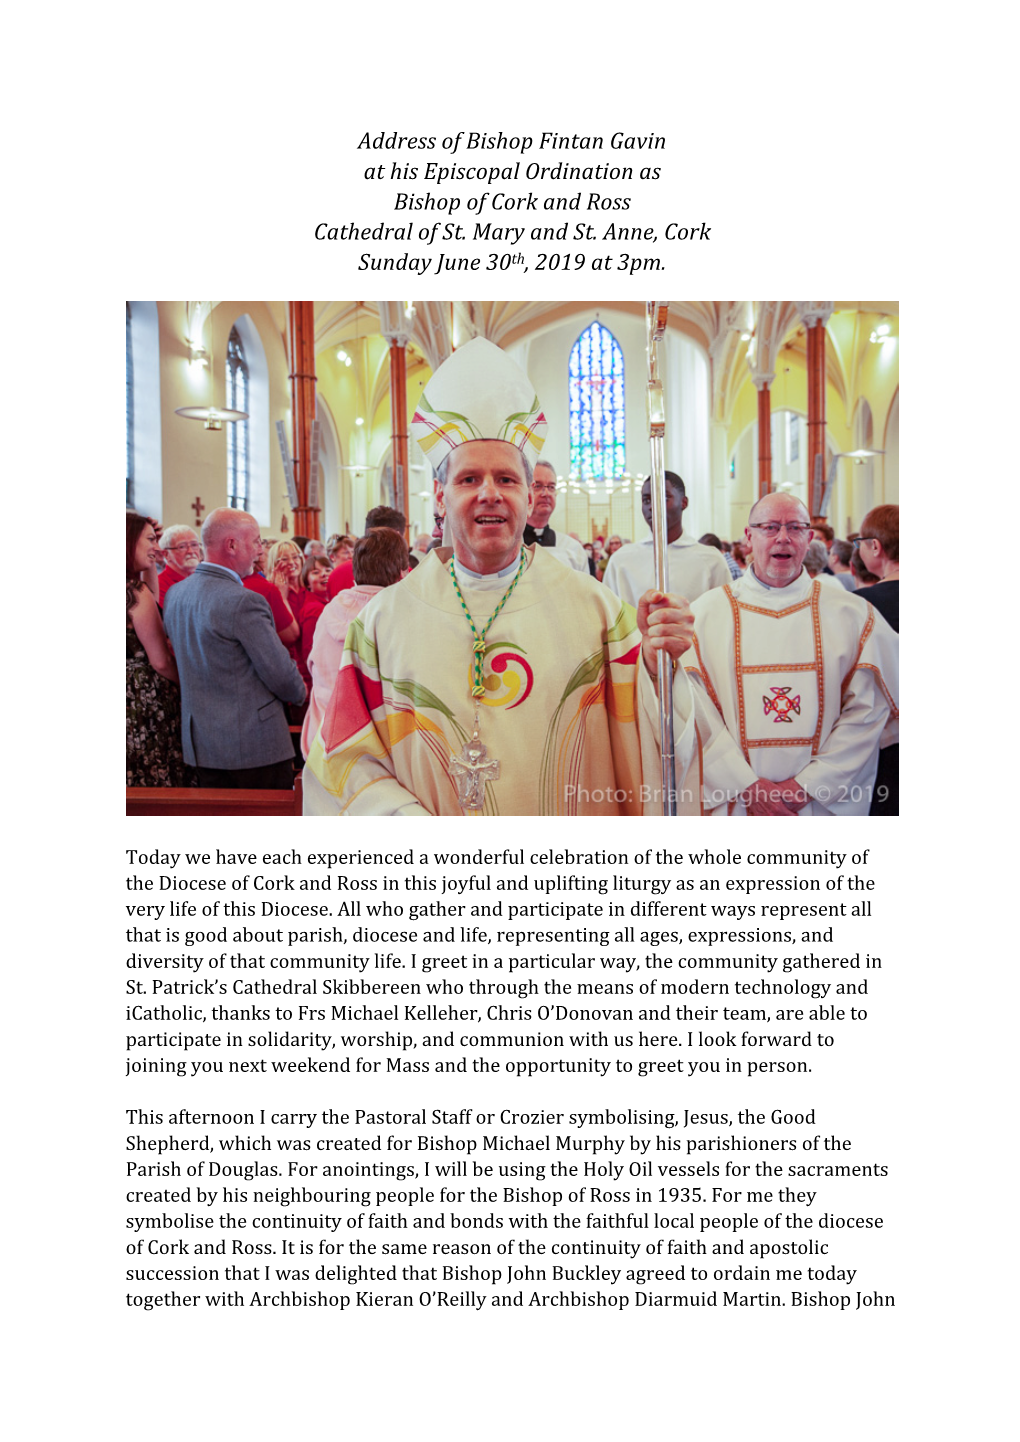 Address of Bishop Fintan Gavin at His Episcopal Ordination As Bishop of Cork and Ross Cathedral of St